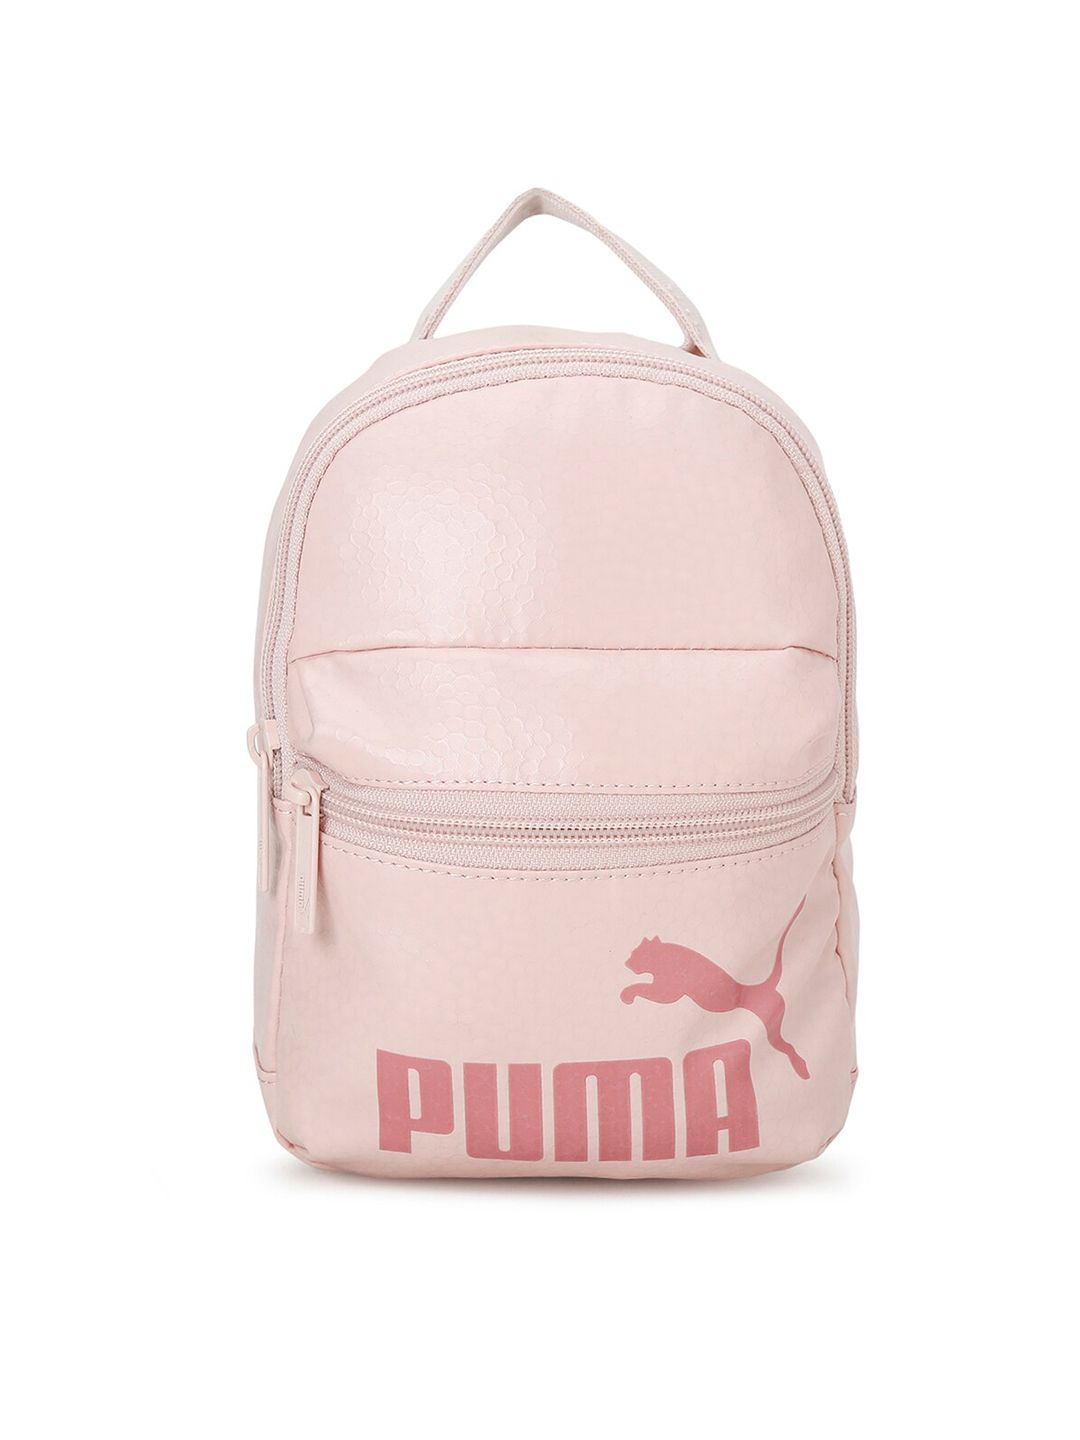 Puma Women Pink Core Up Minime Backpack Price in India